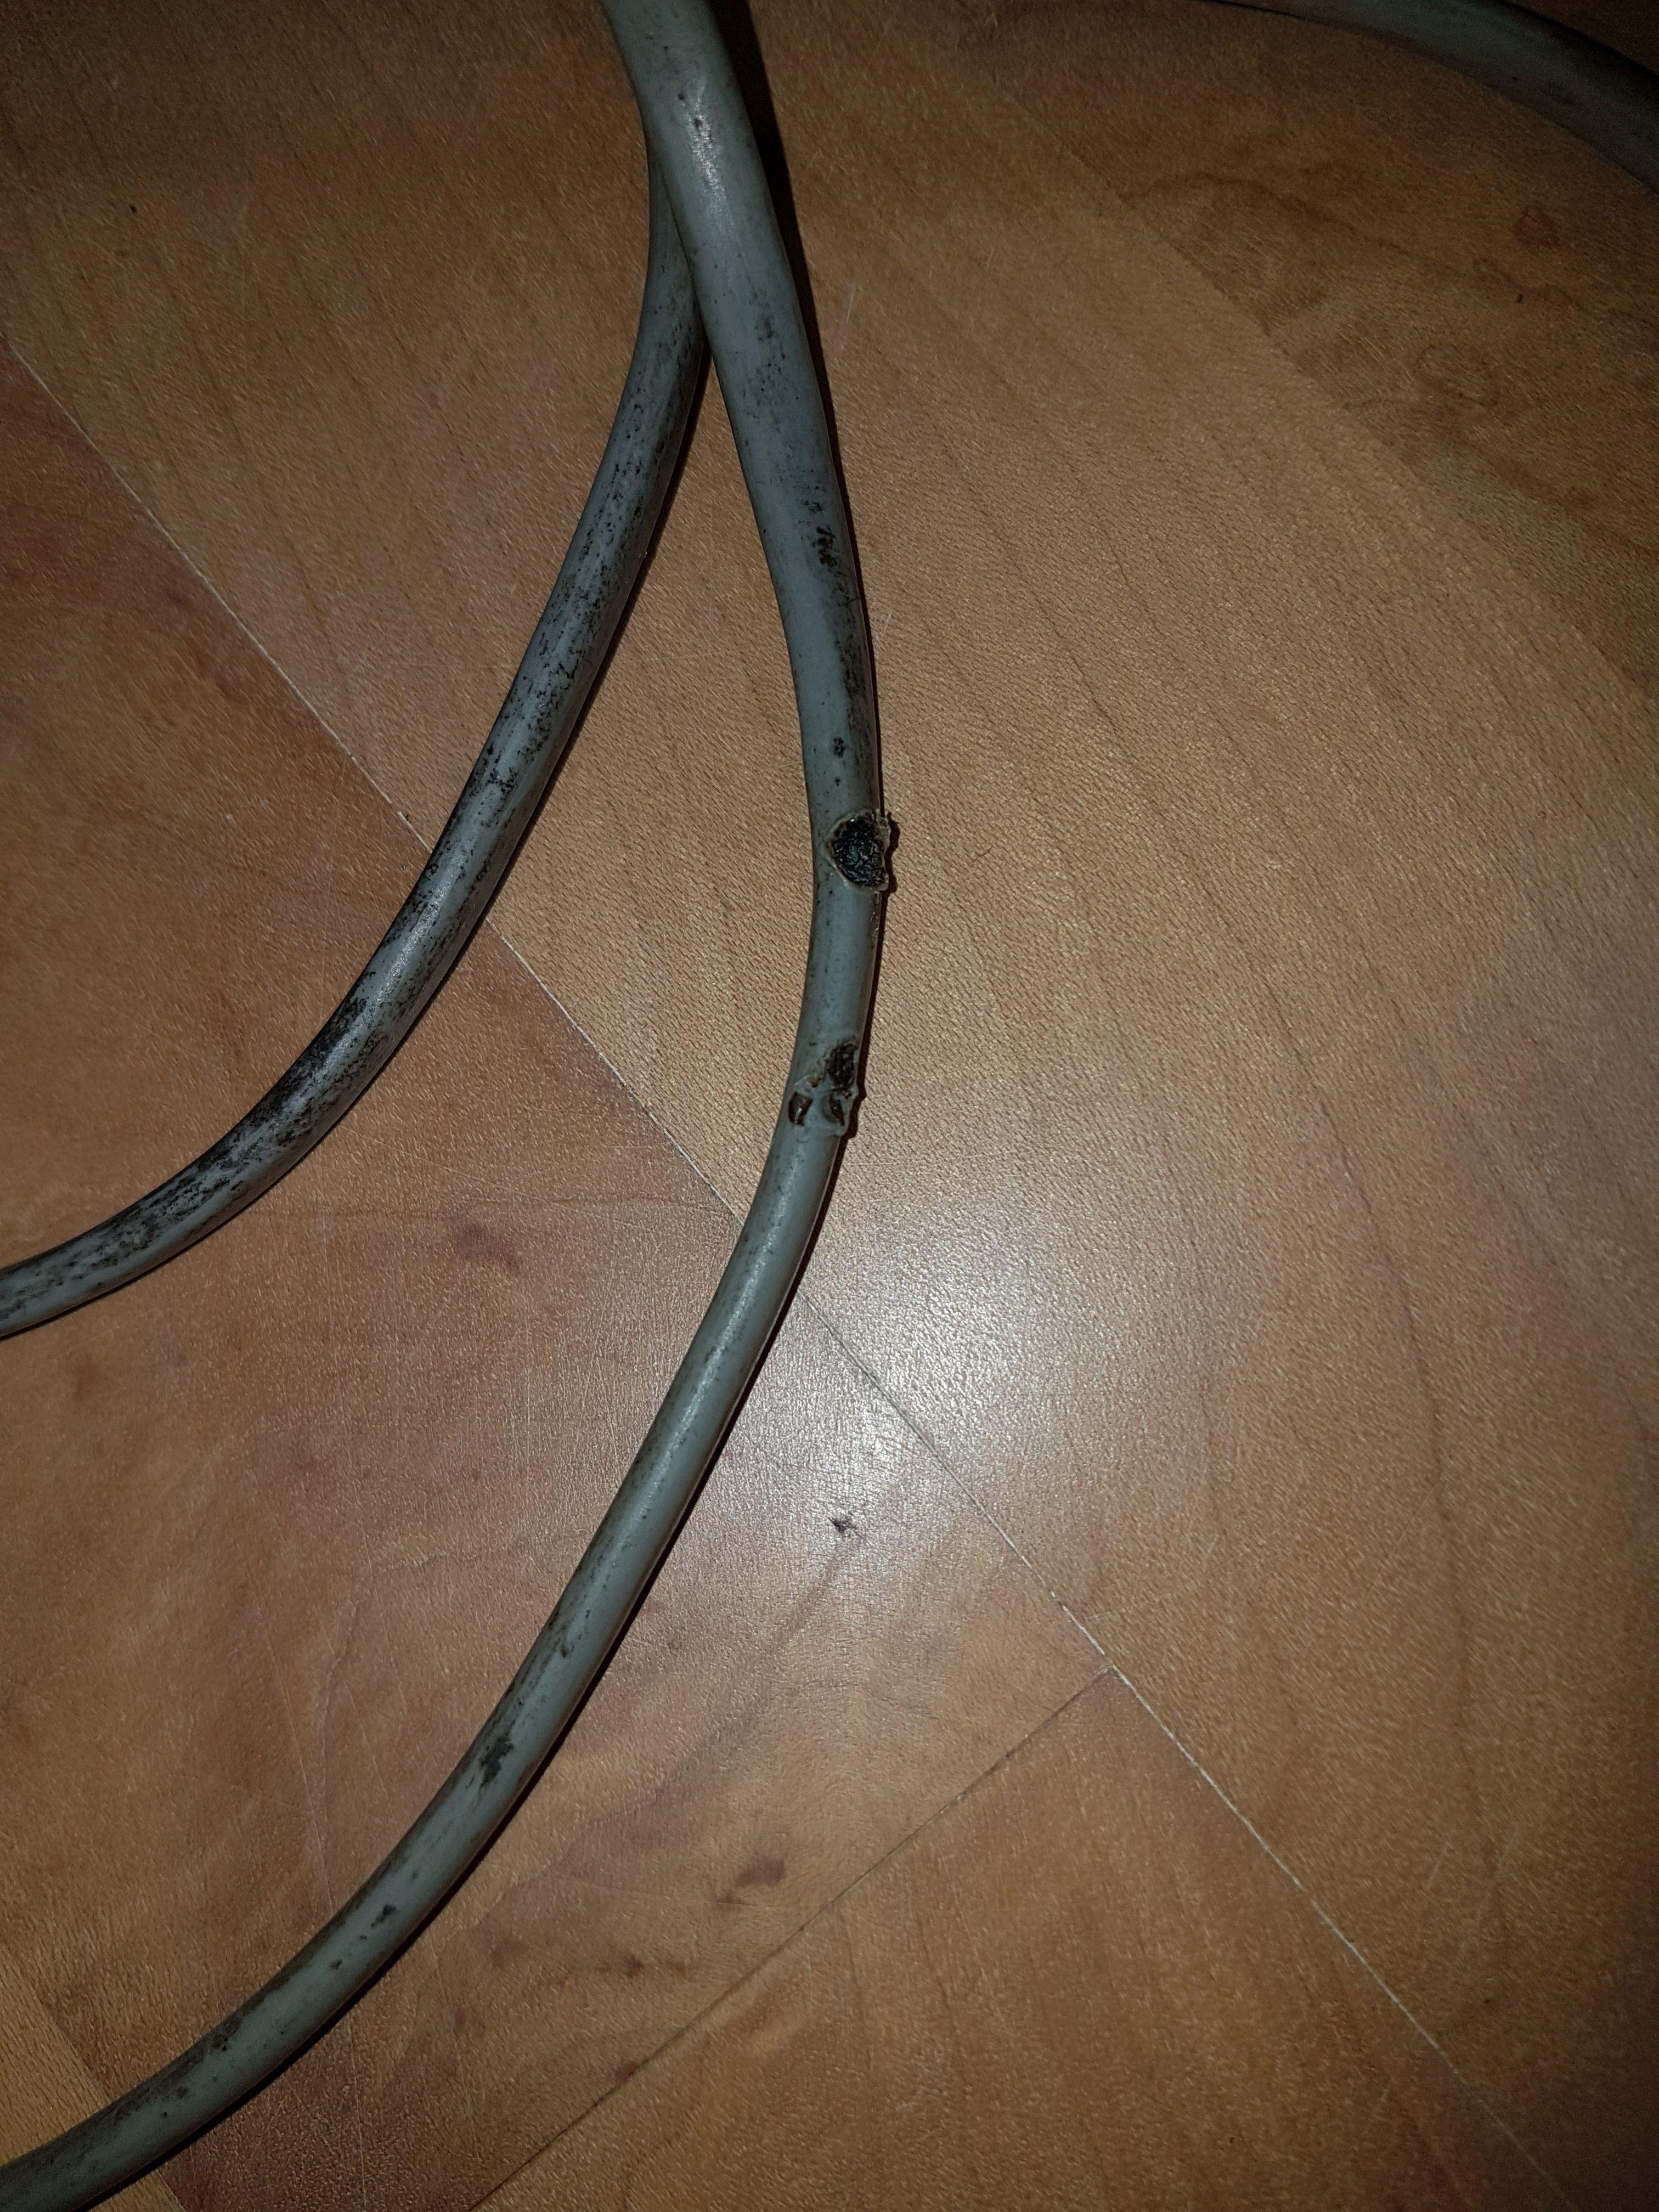 02 - cable damaged &amp; dirty.jpg